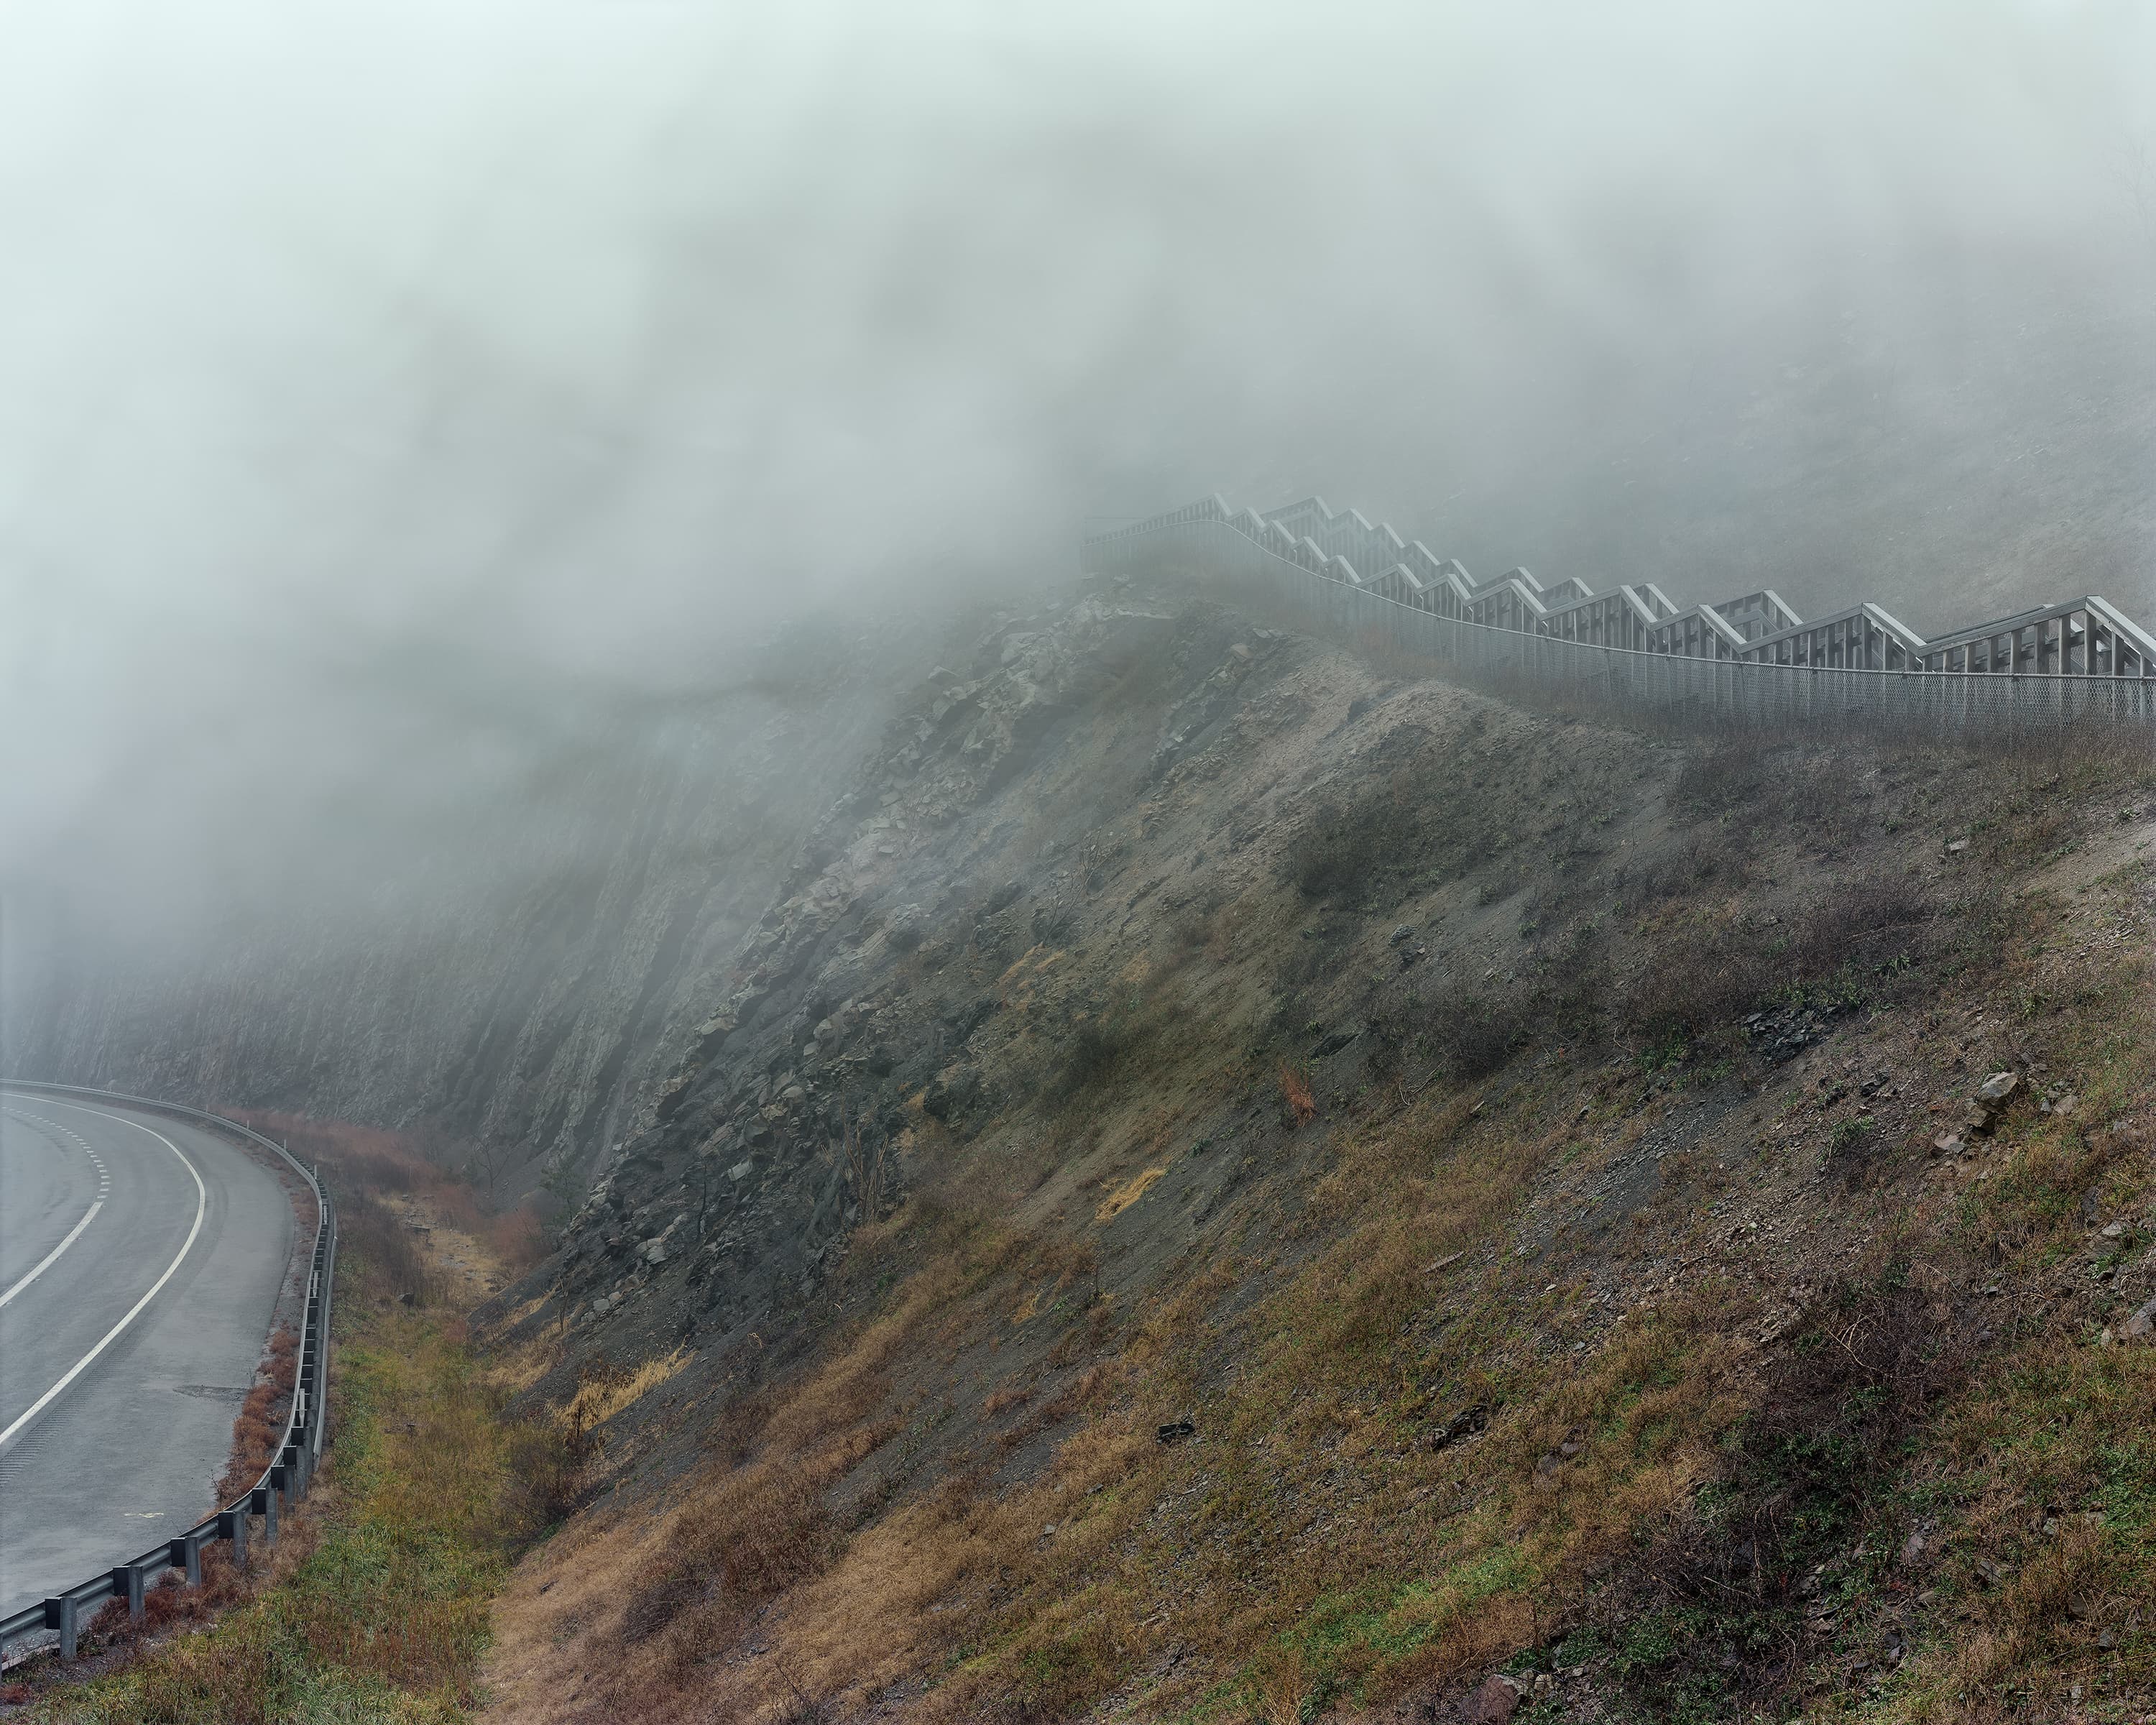 Fog covering a mountain pass with a pedestrian walkway going uphill.